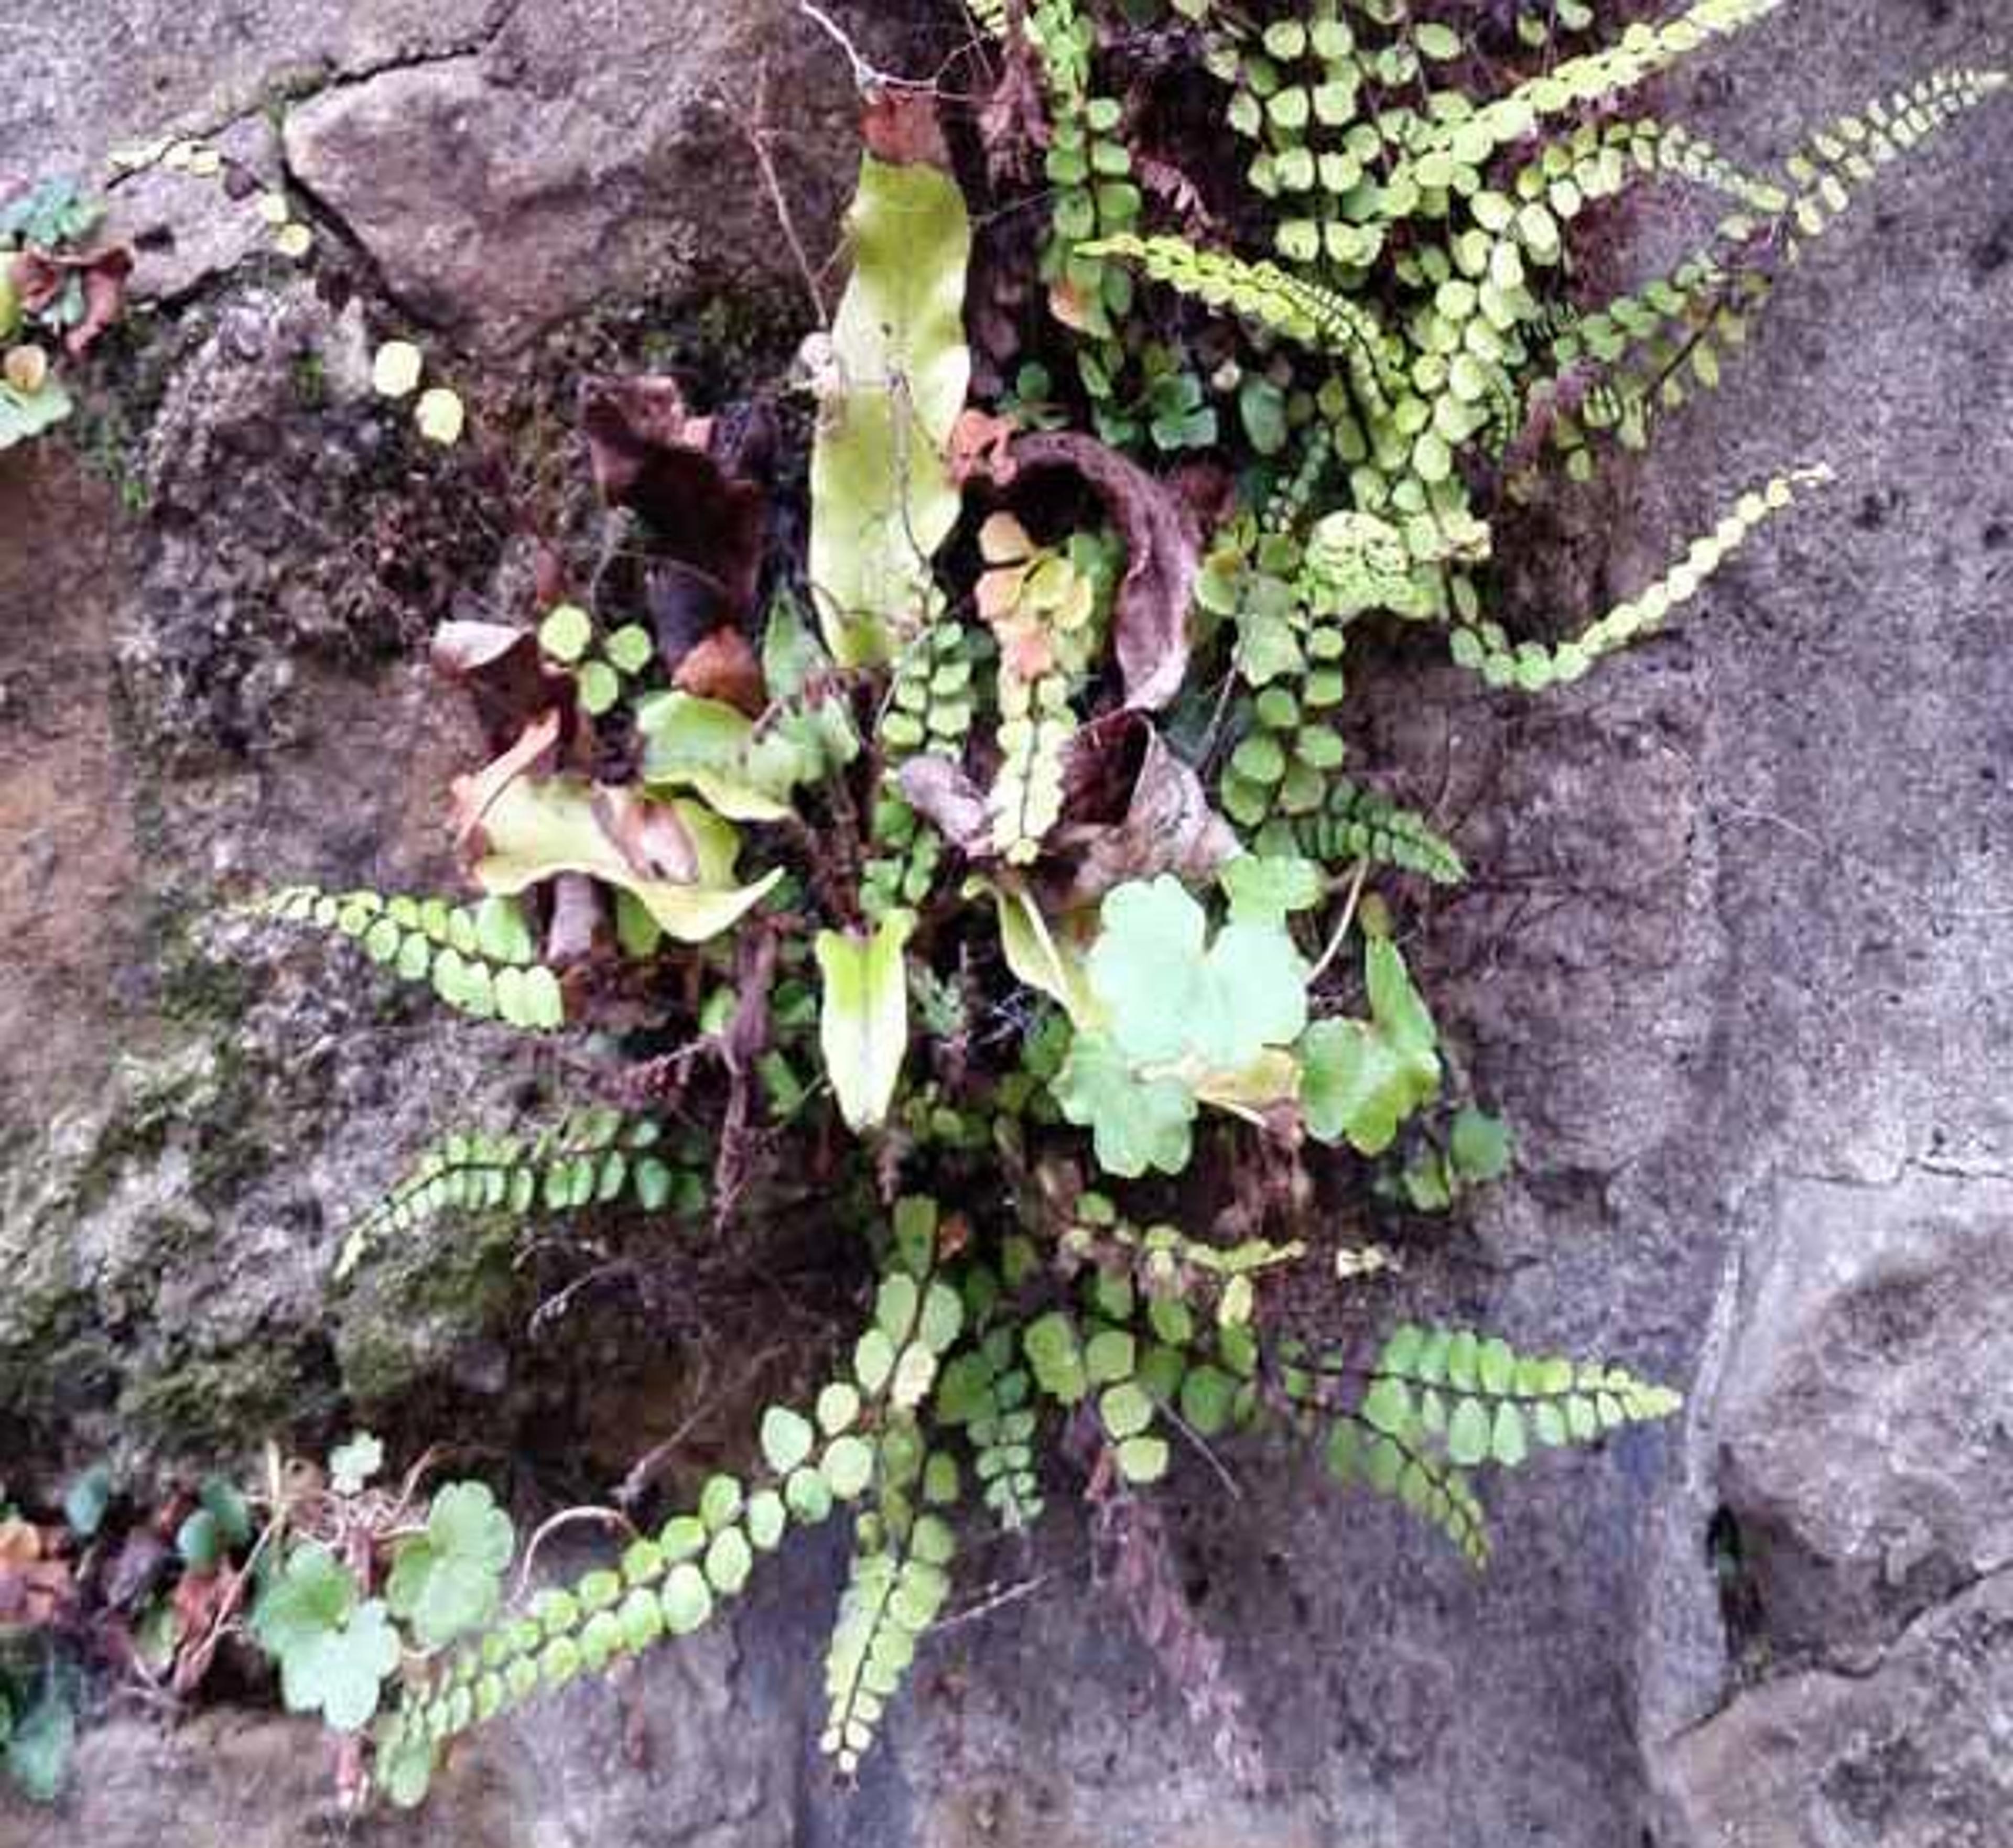 Hart's tongue fern (Asplenium scolopendrium) growing with the common spleenwort (Asplenium trichomanes) in a wall along the Water of Leith Walkway in the medieval Dean Village area of Edinburgh, Scotland. 